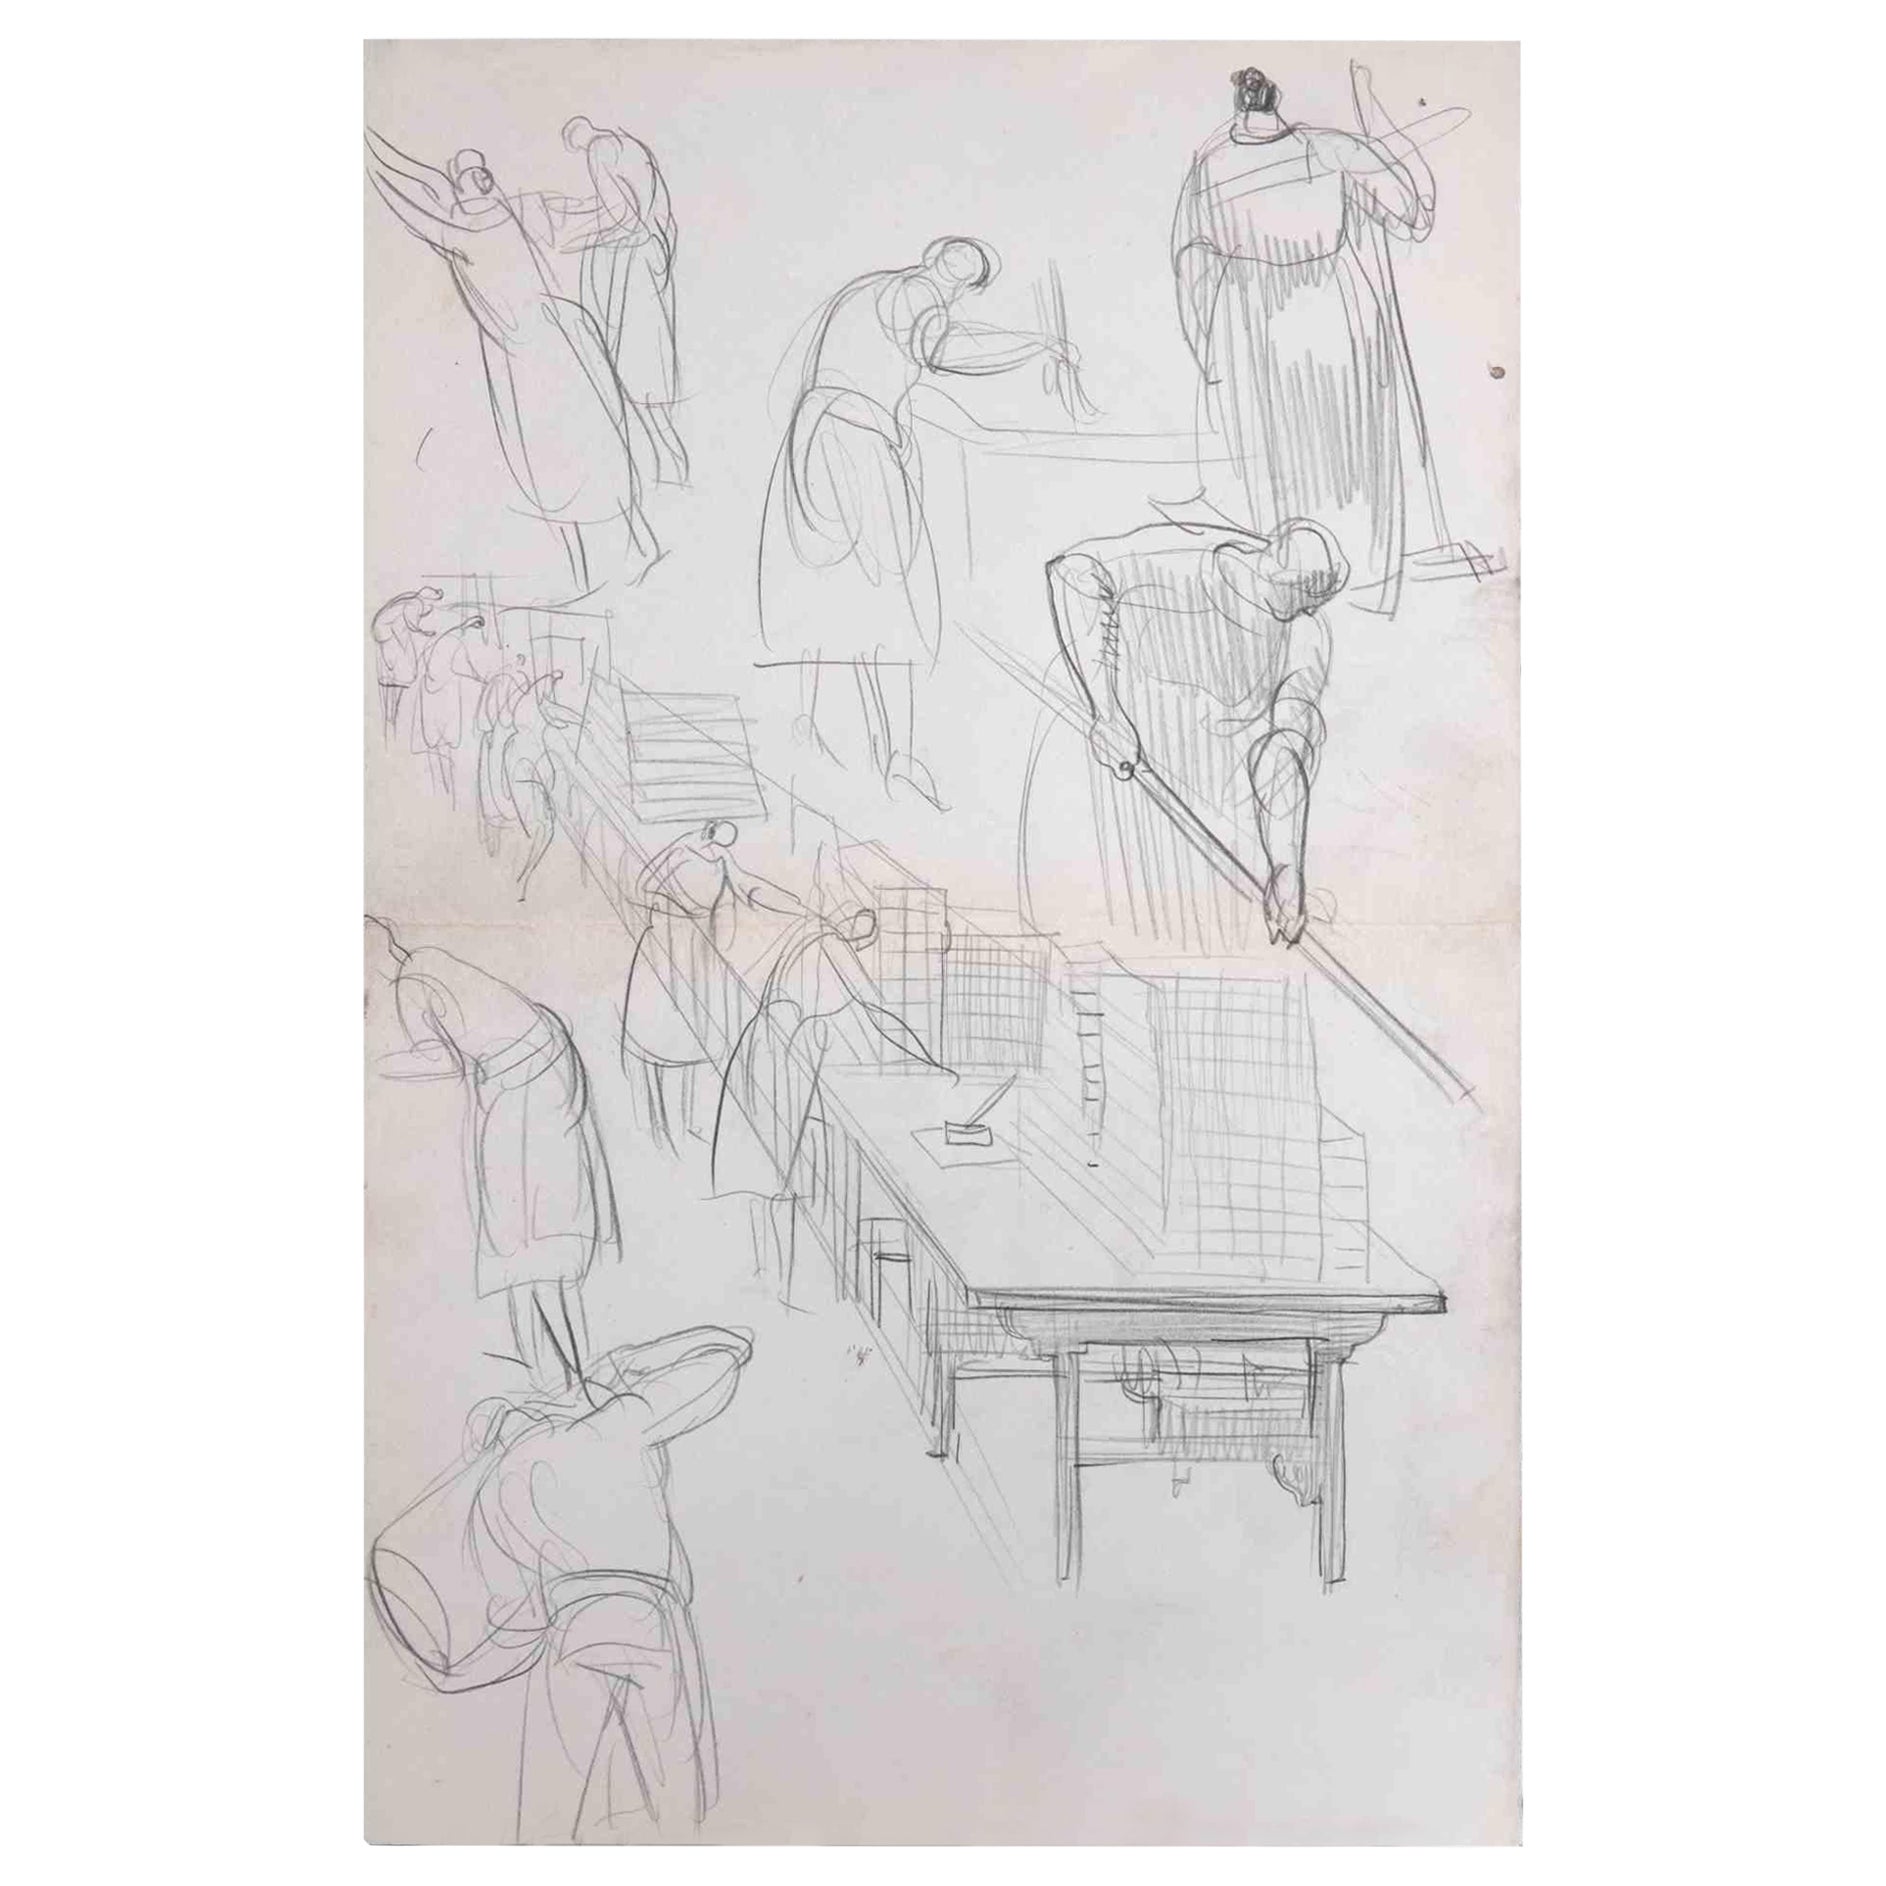 Auguste Leroux Figurative Art - Sketches of Workers - Original Drawing - Early 20th Century